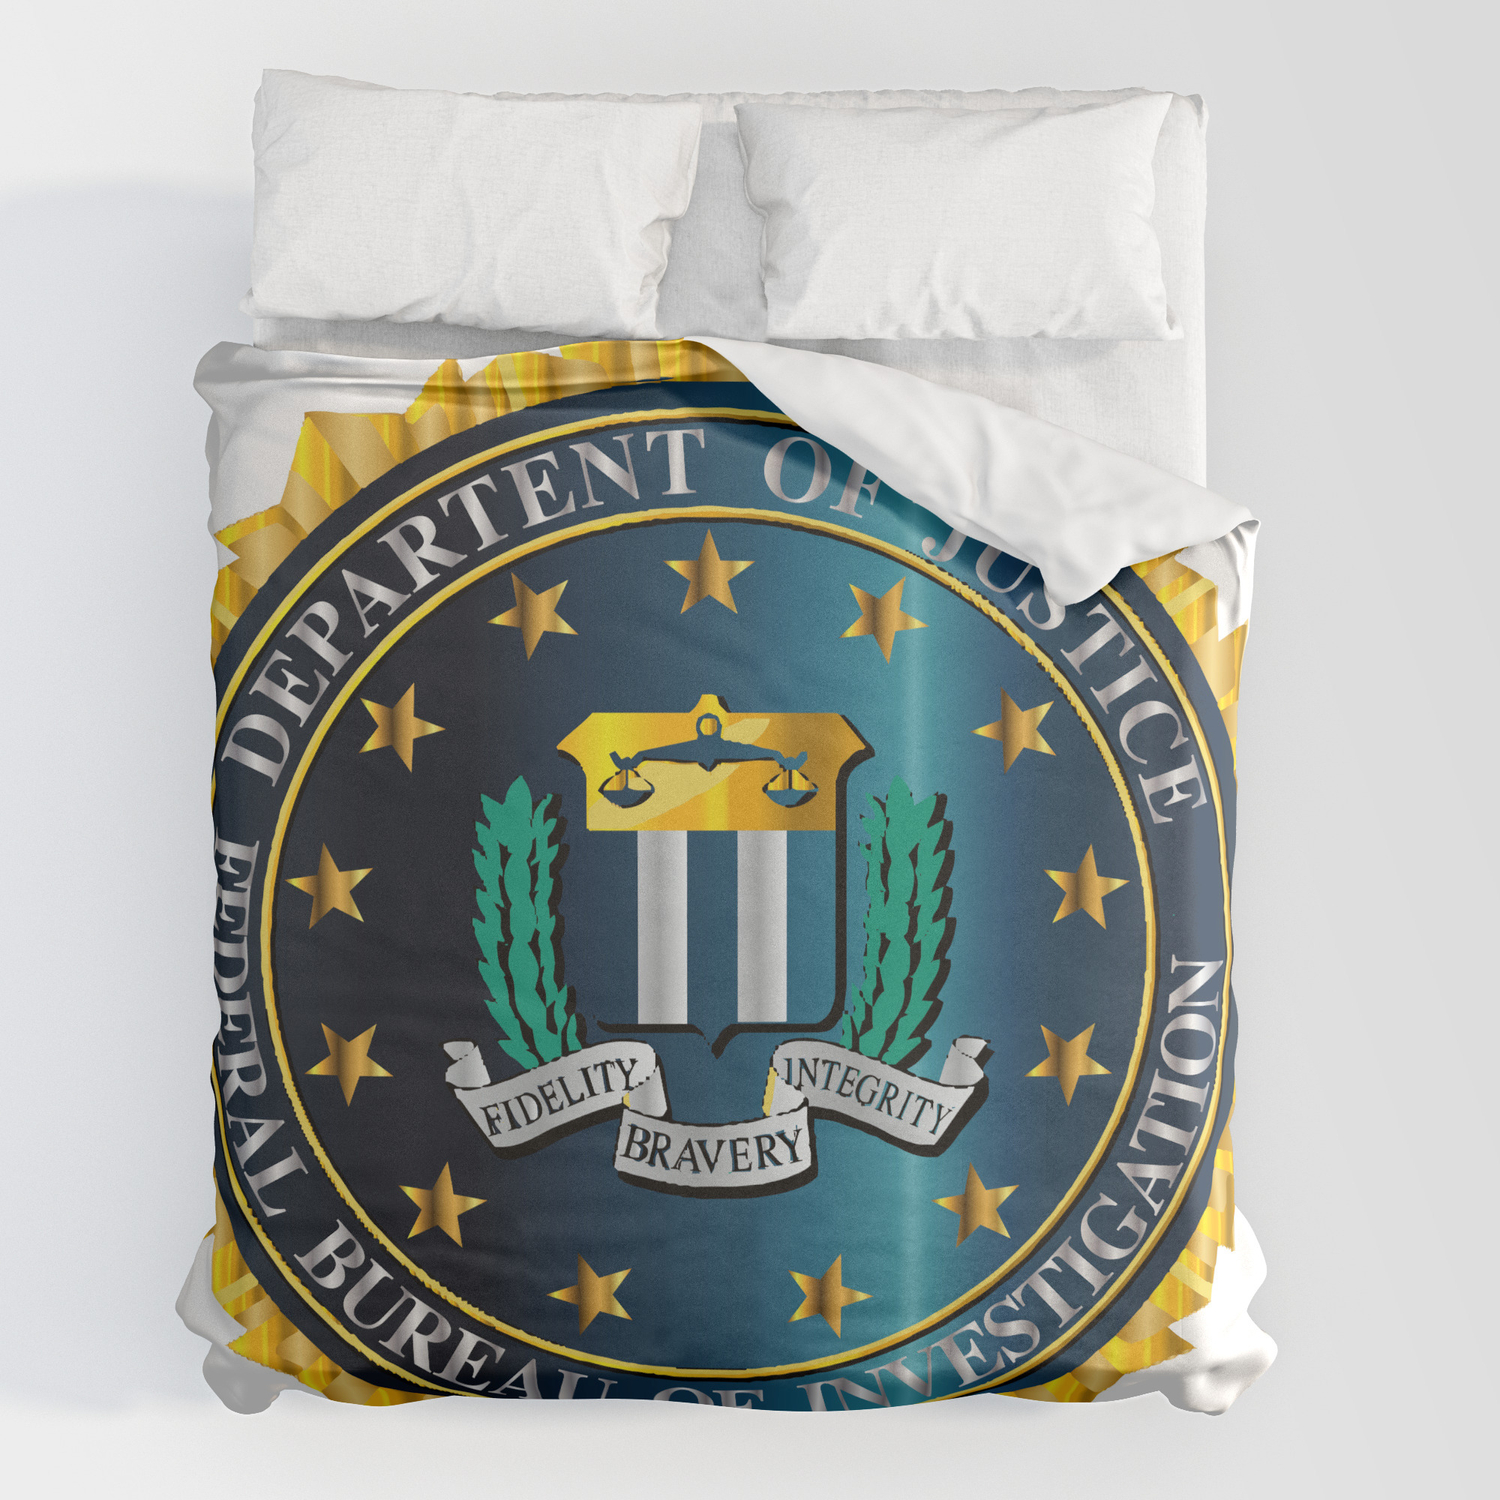 Download Fbi Seal Mockup Duvet Cover By Homestead Society6